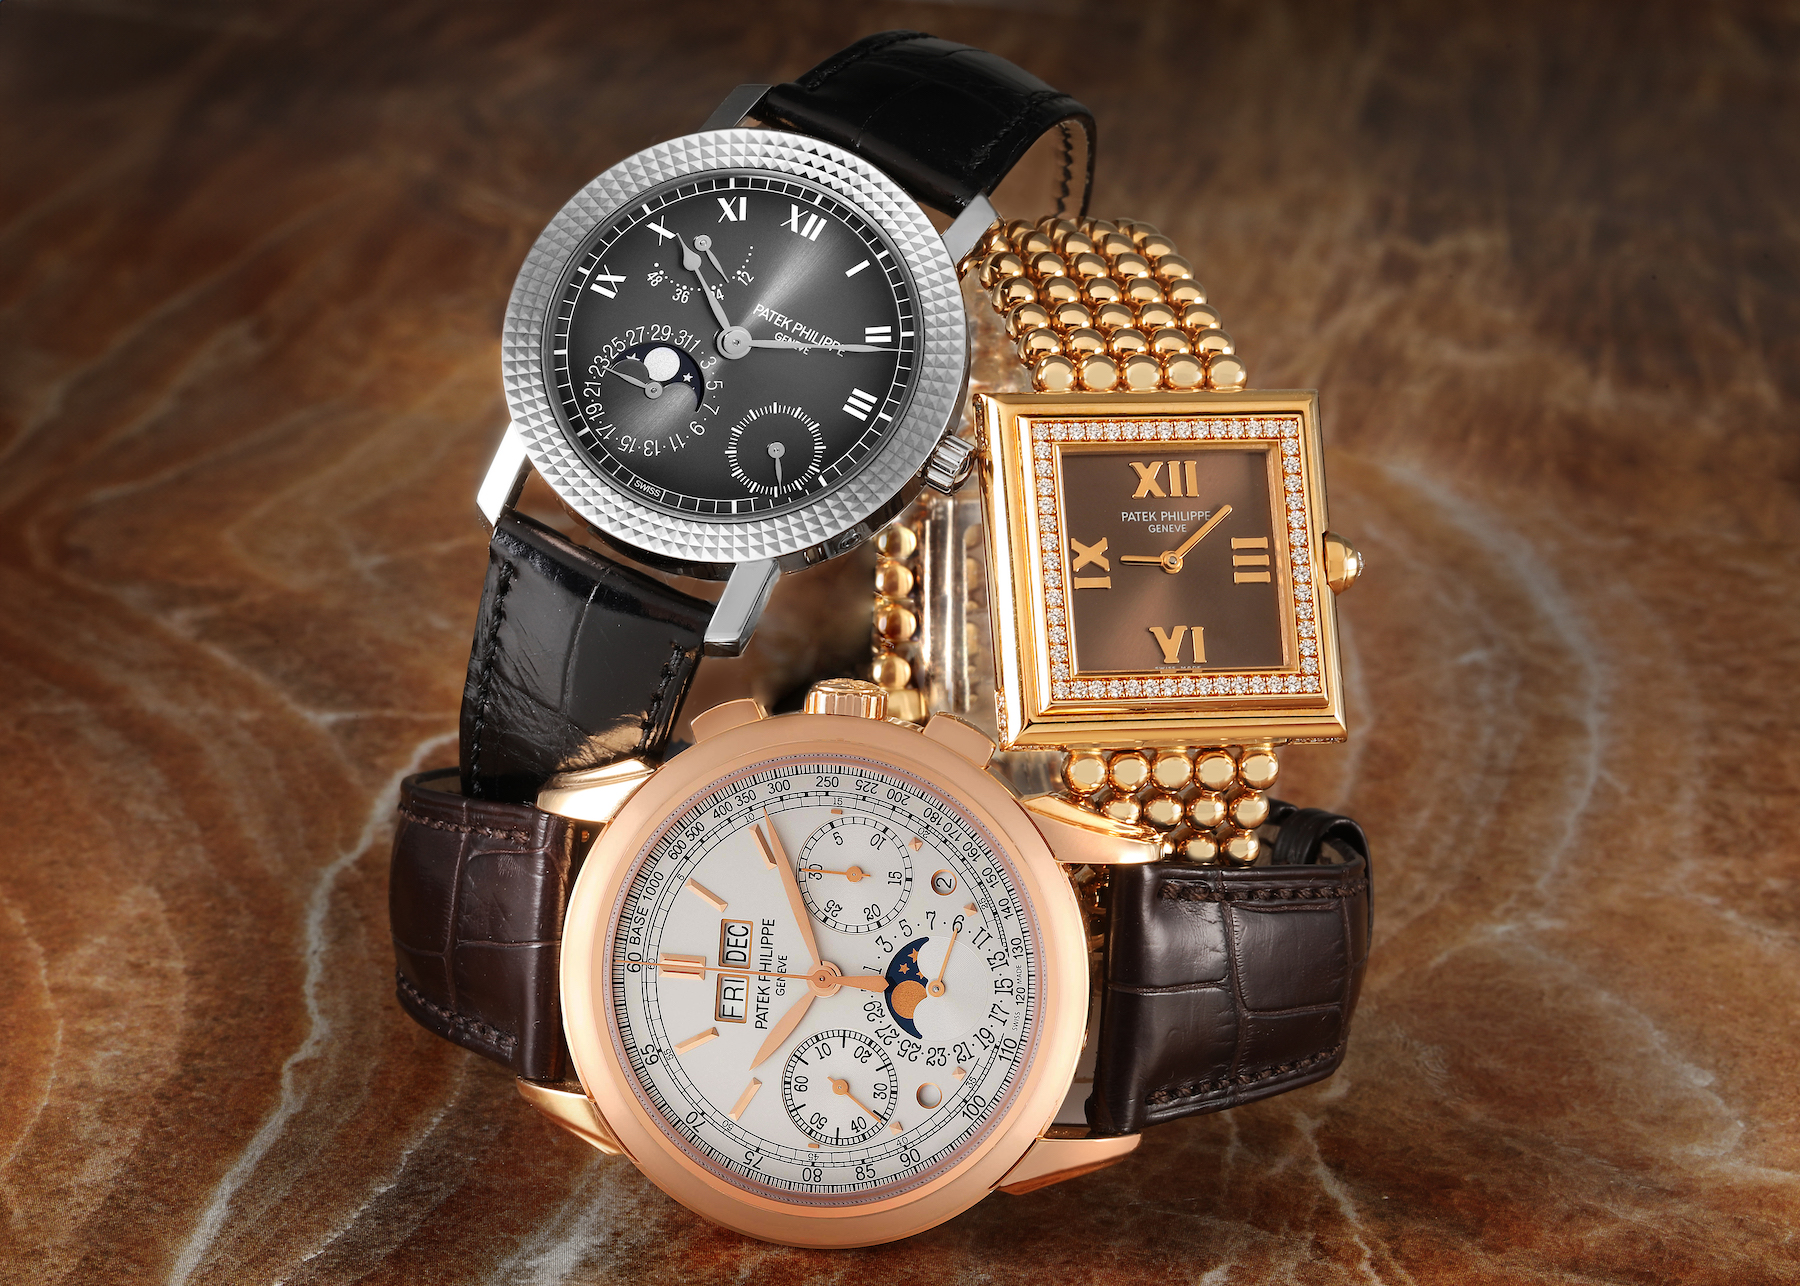 Where are Patek Philippe Watches Made